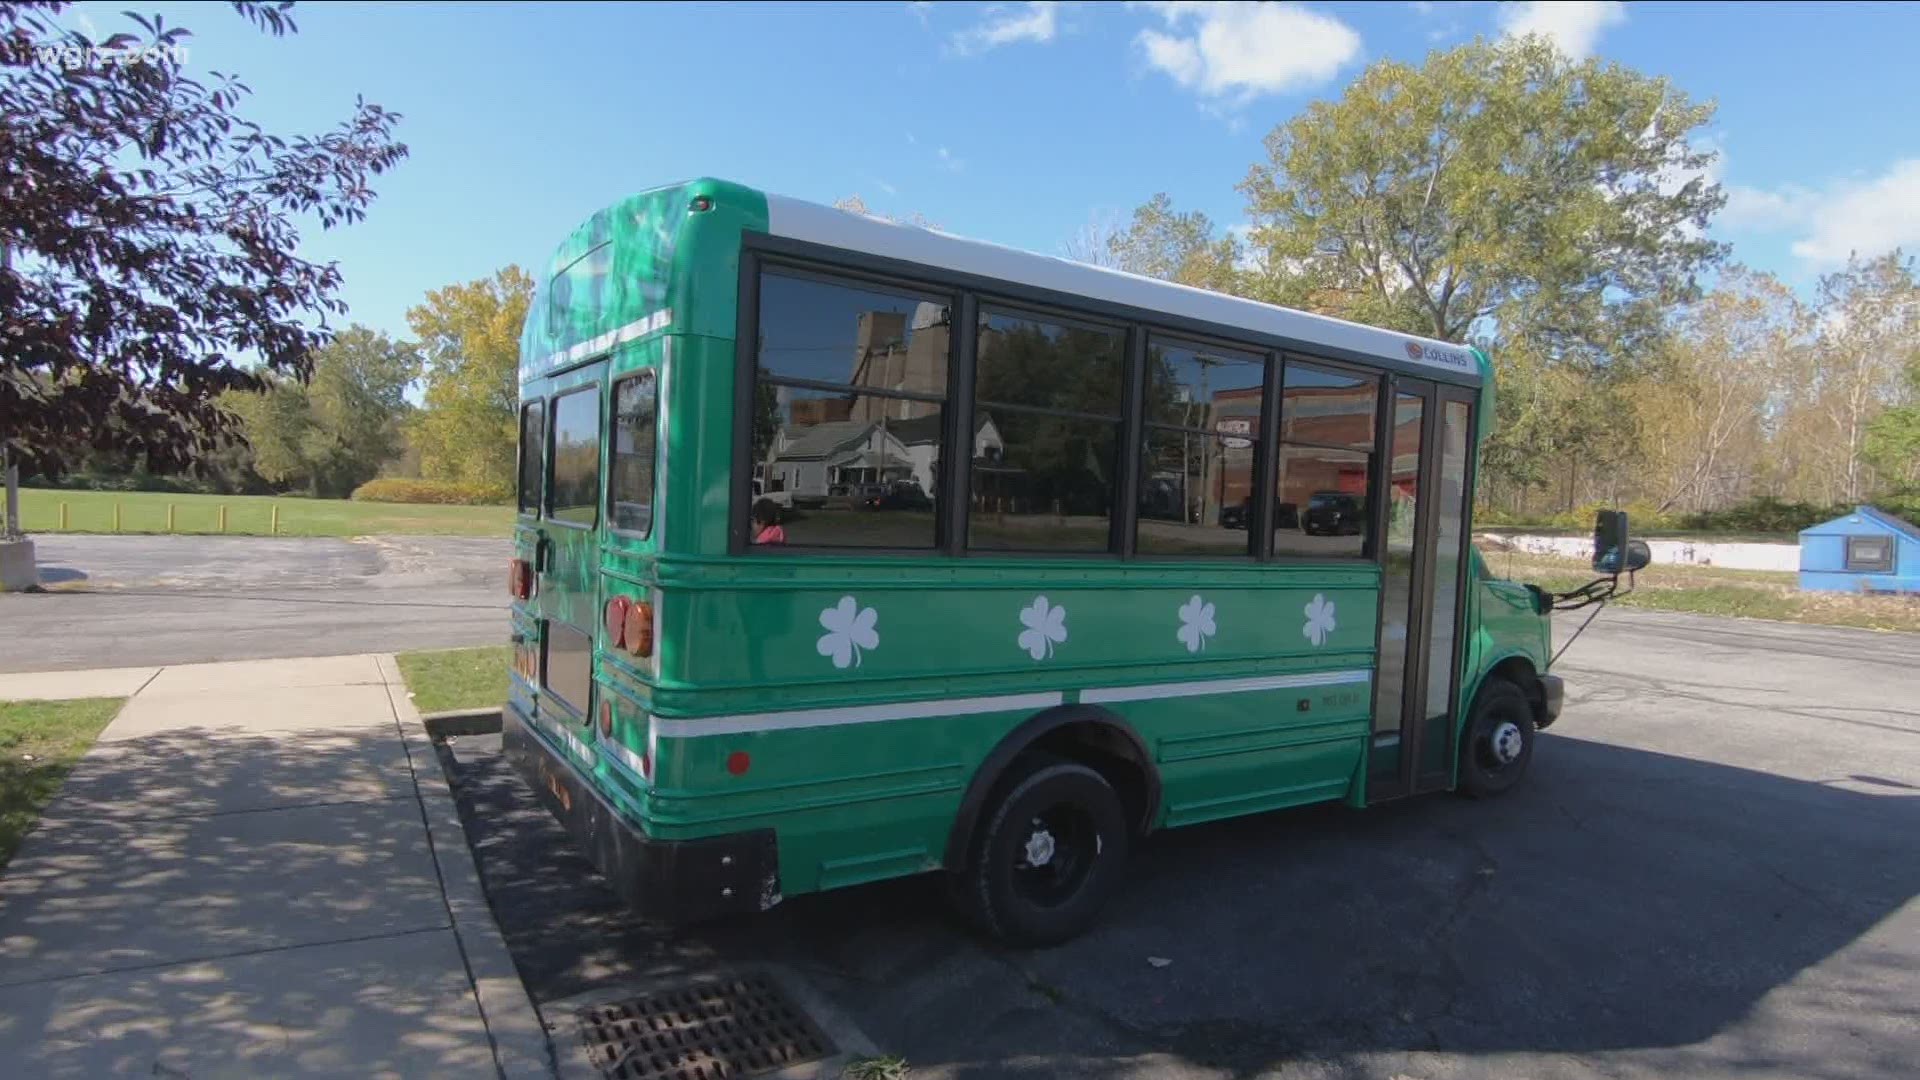 The mini-bus is owned by the Valley Community Association in Buffalo.